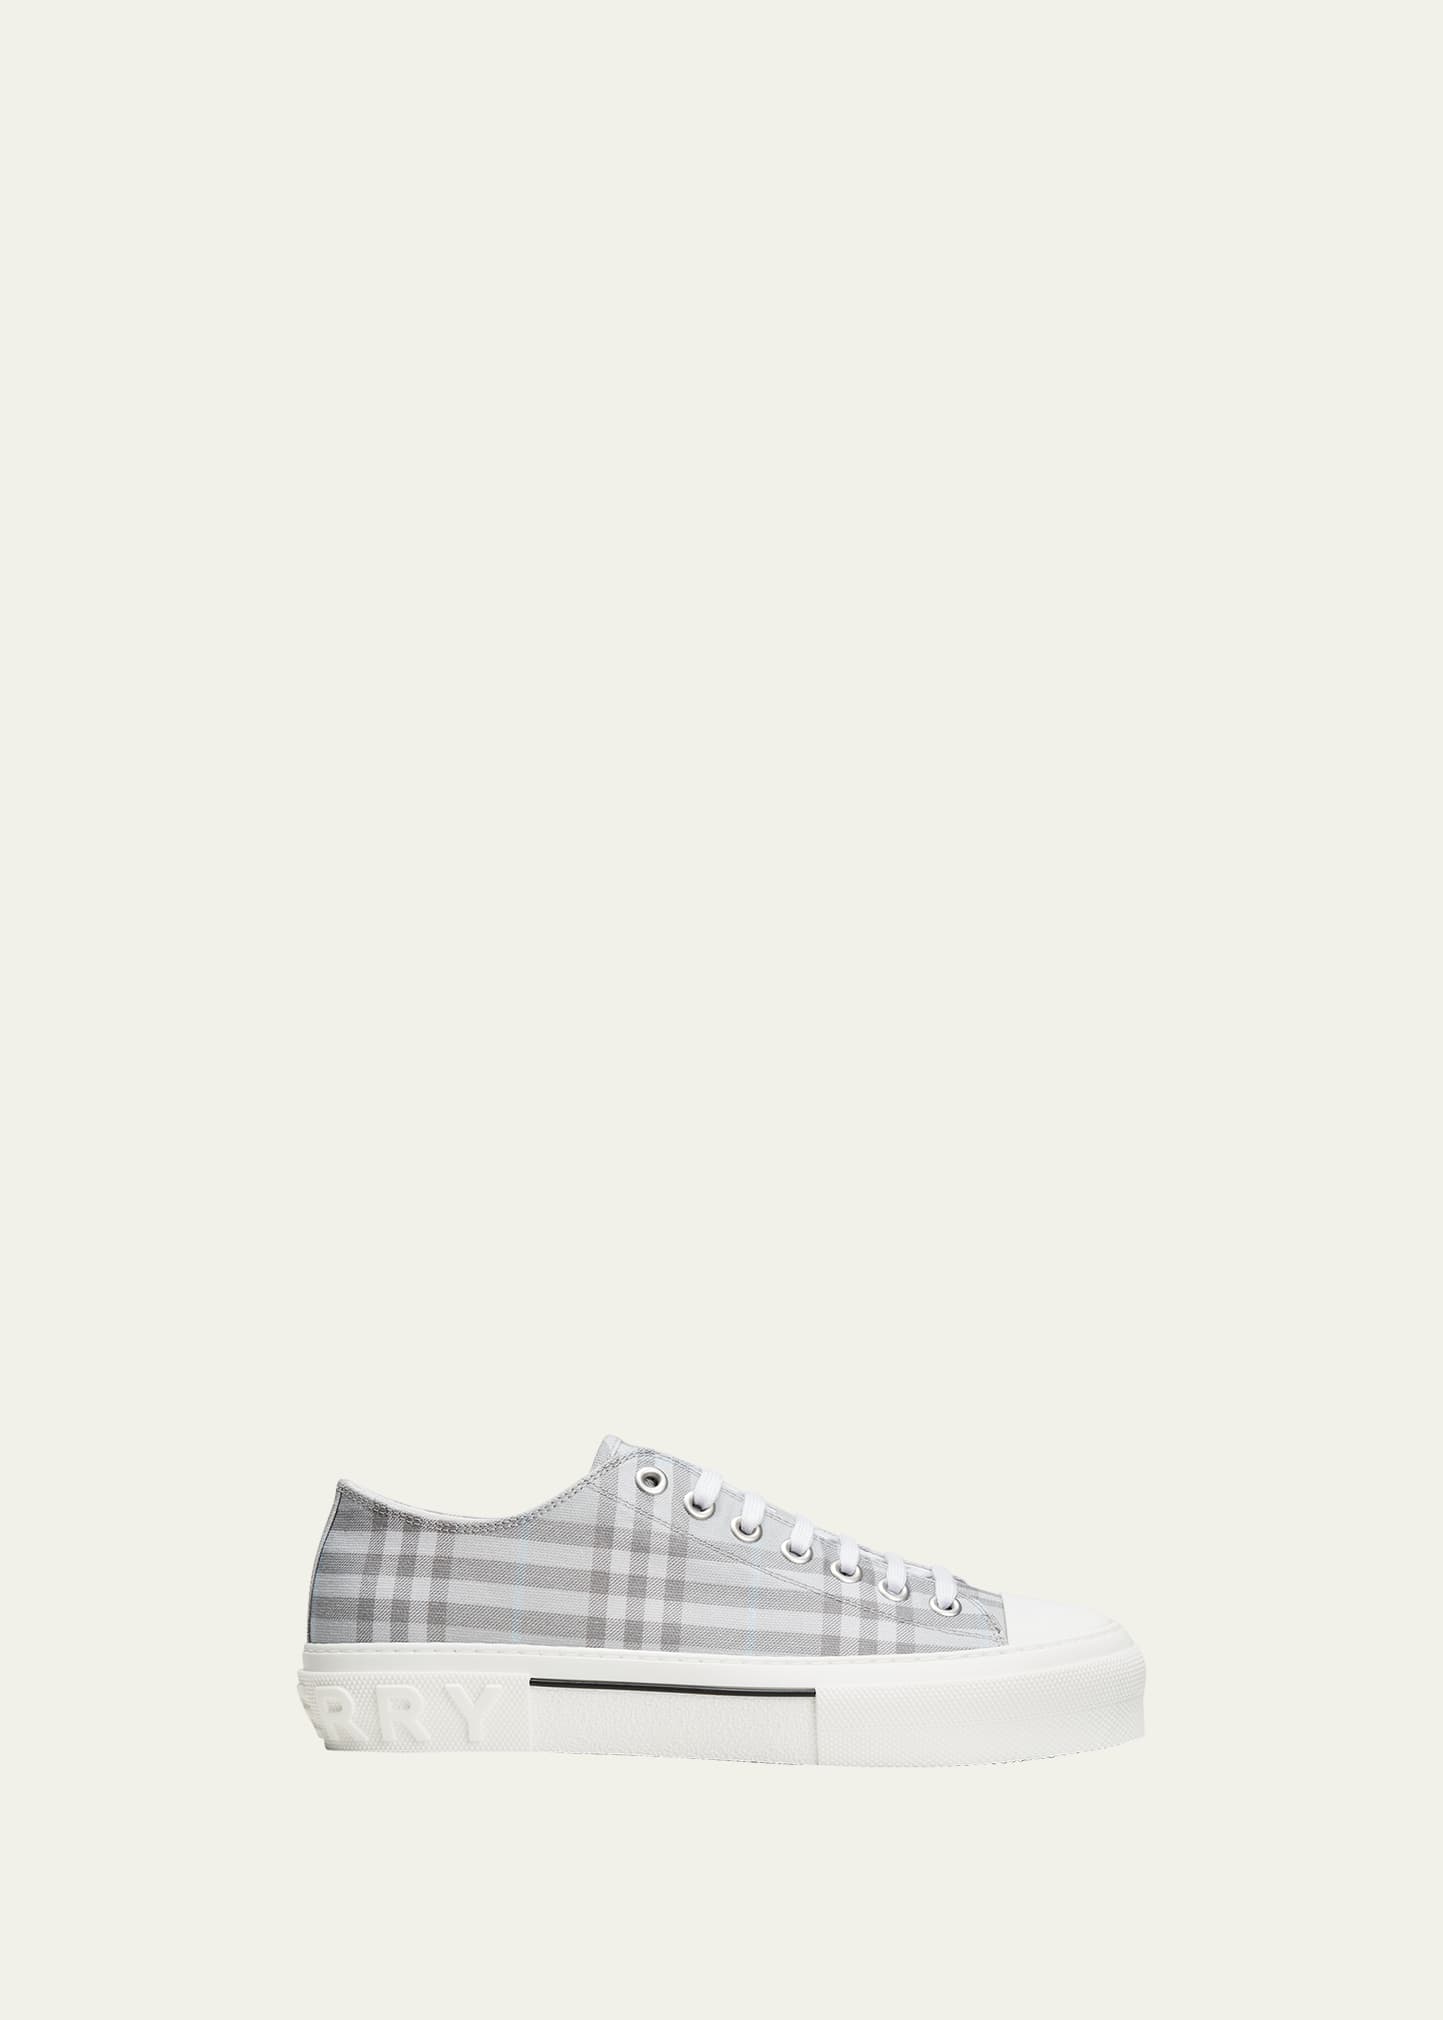 Burberry Men's Check Canvas Low-Top Sneakers